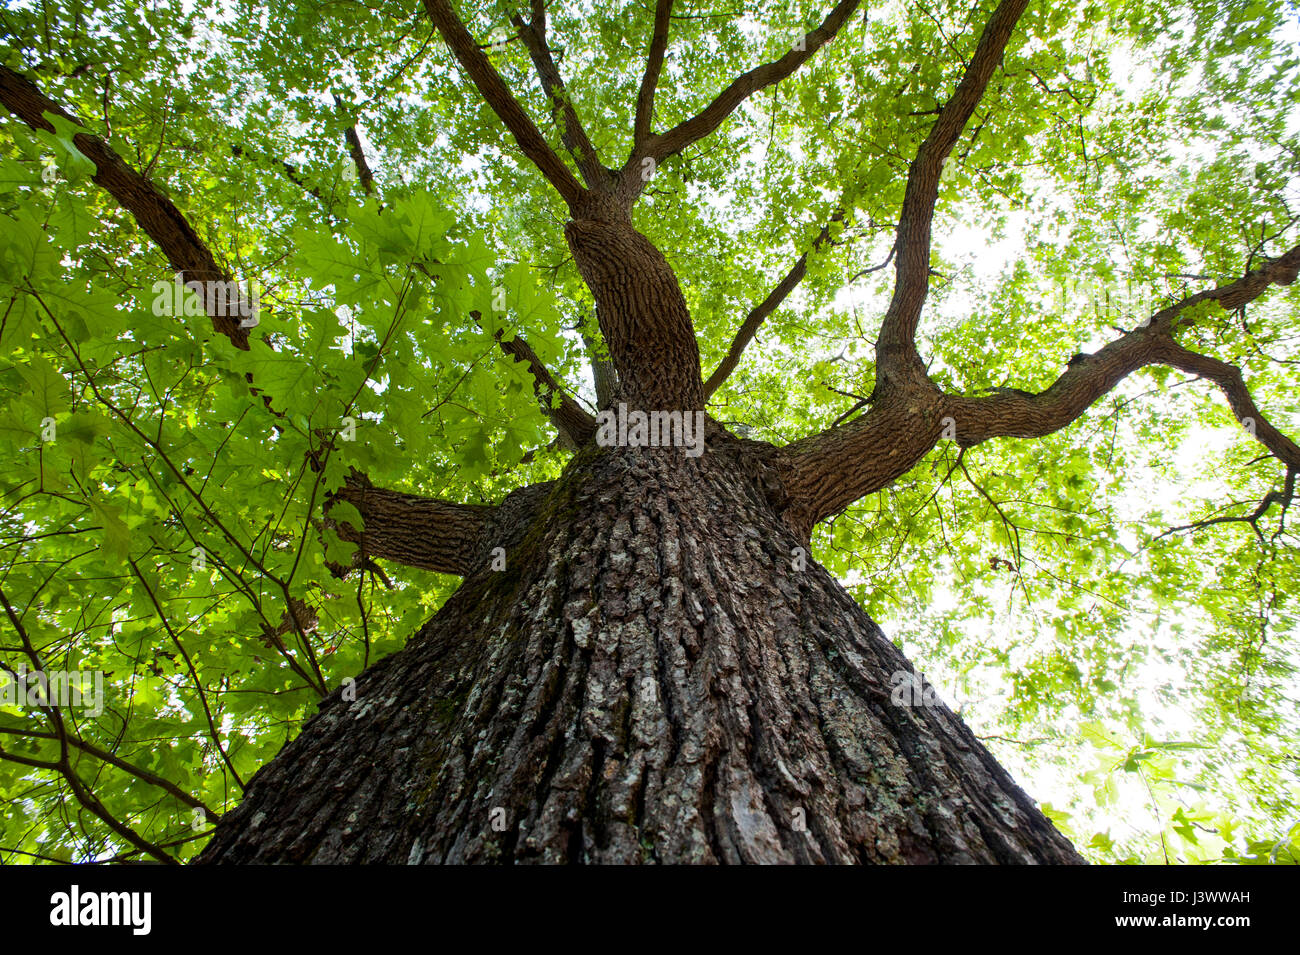 Plants Trees a mature oak tree in the Tidewater area of Virginia looking up the trunk of the tree Stock Photo